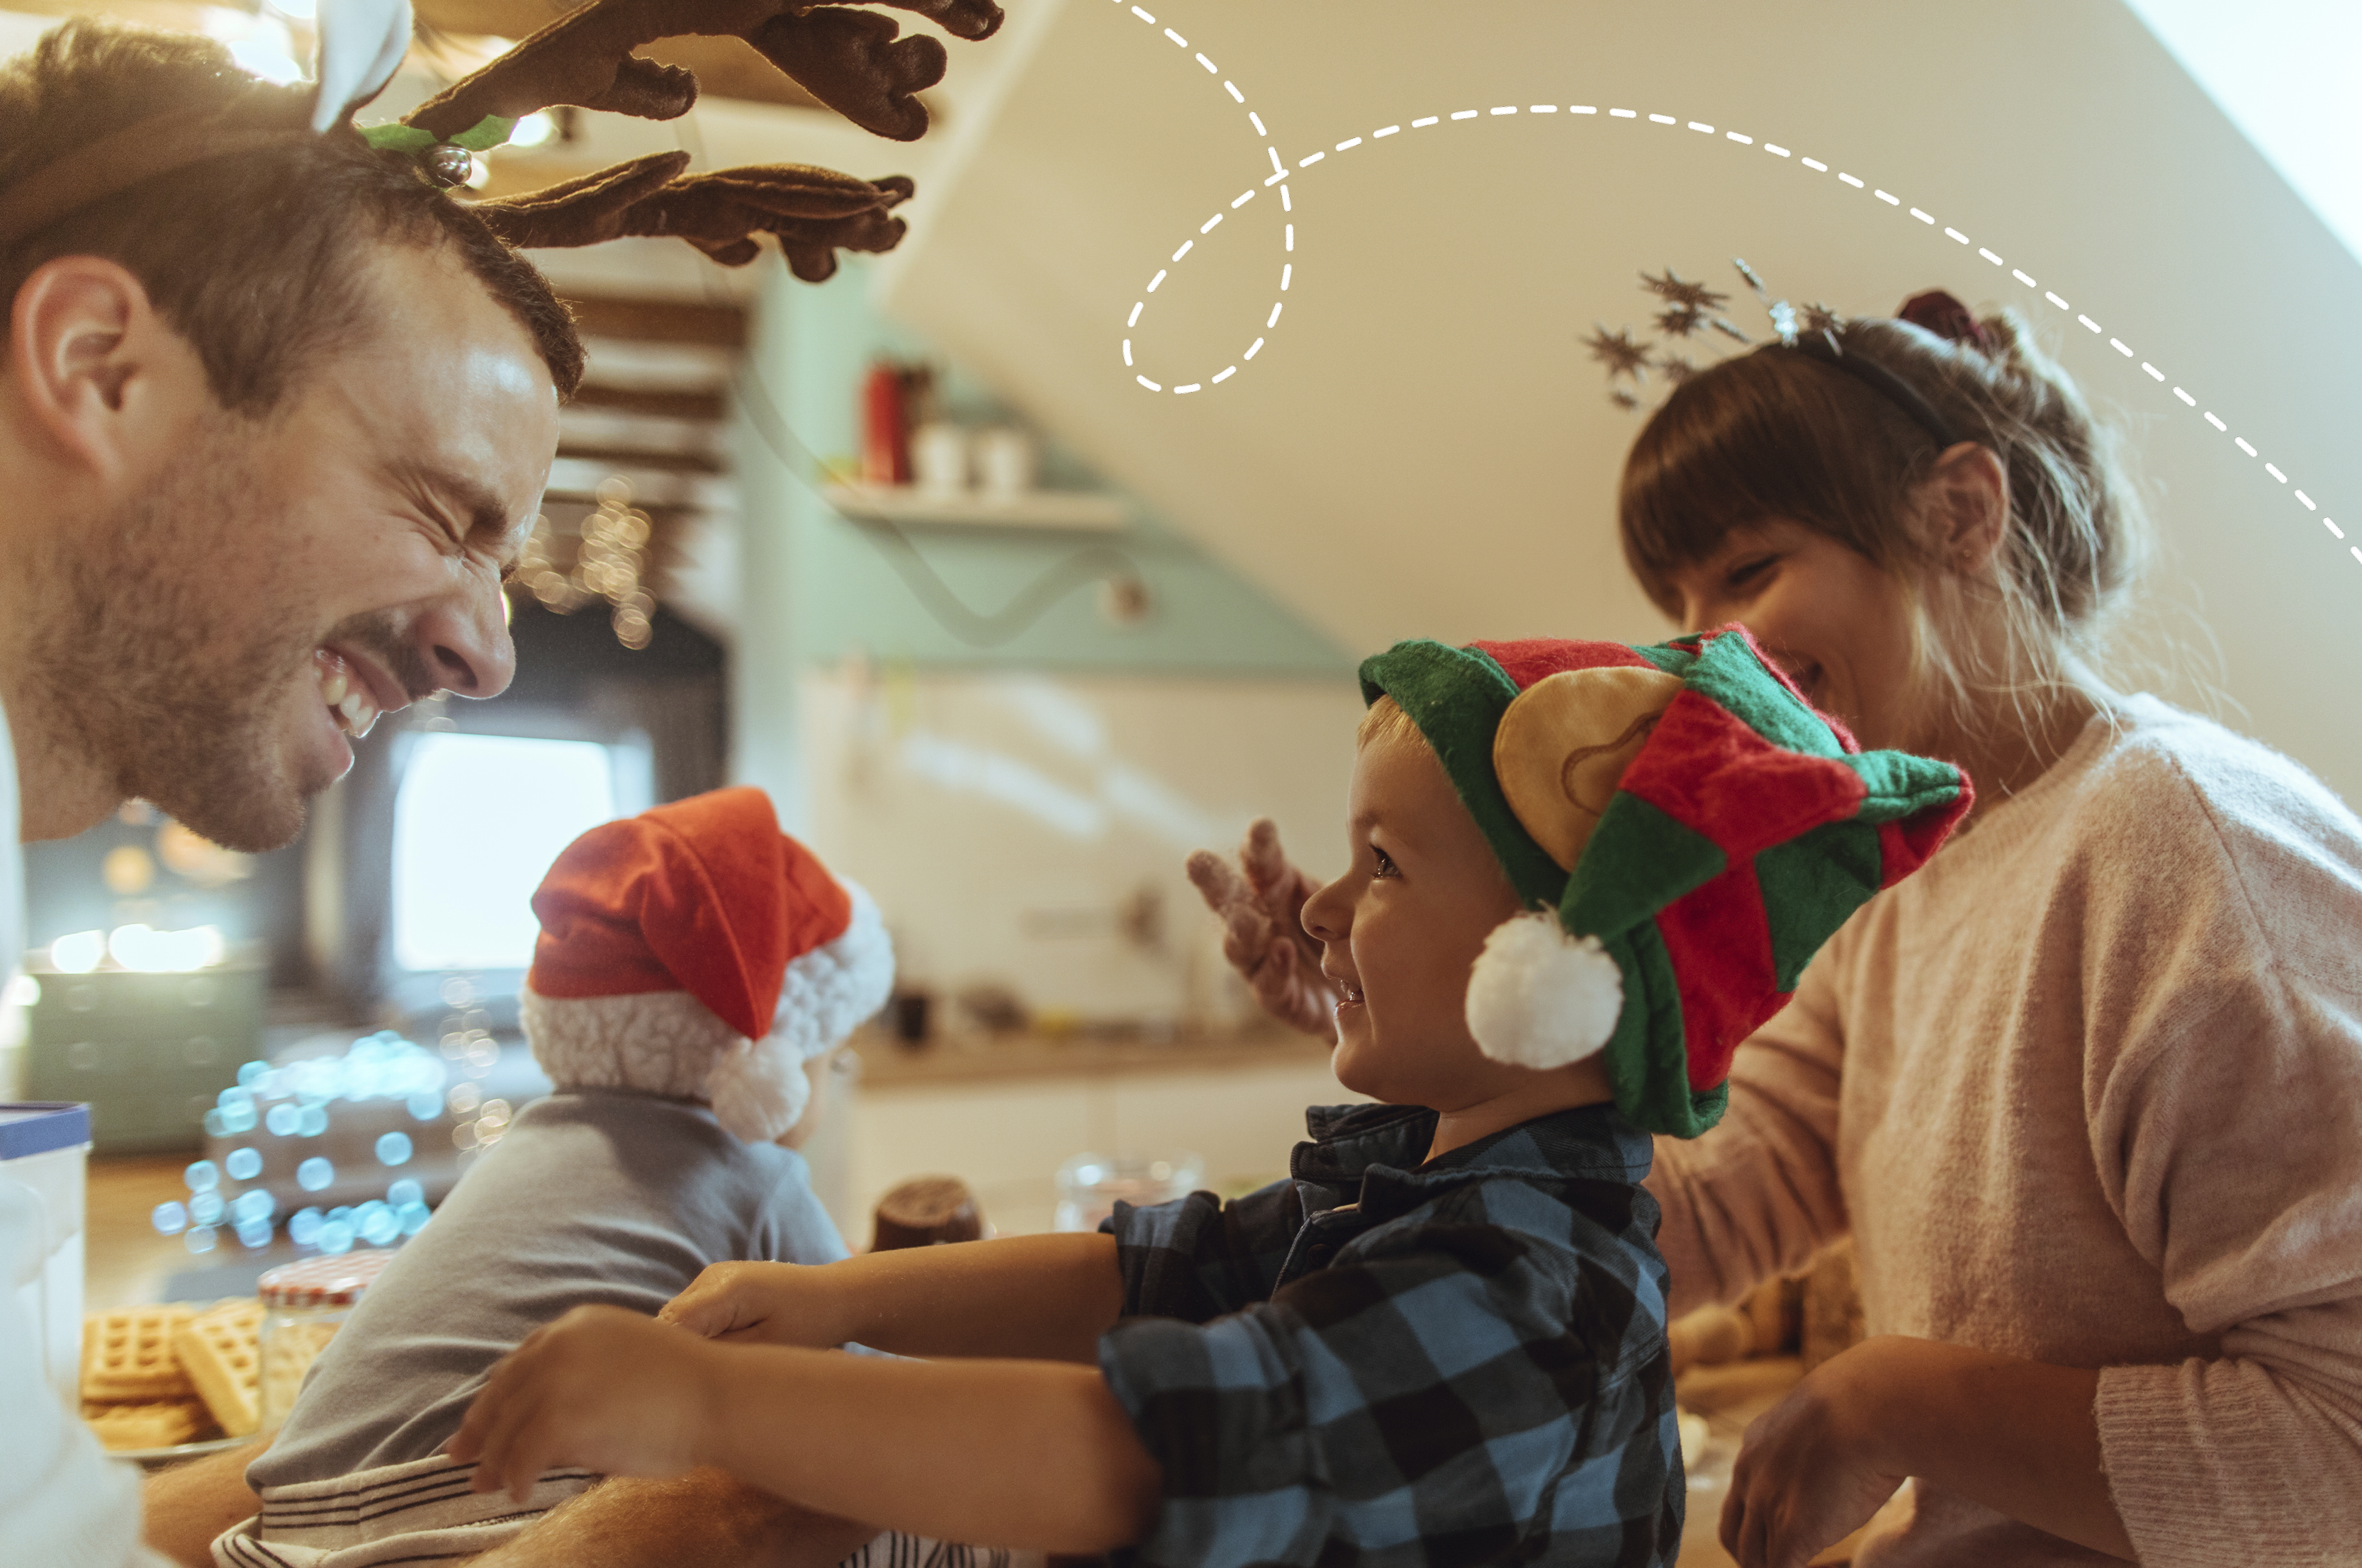 A photo of a dad making a funny face at his toddler son whilst wearing festive antlers